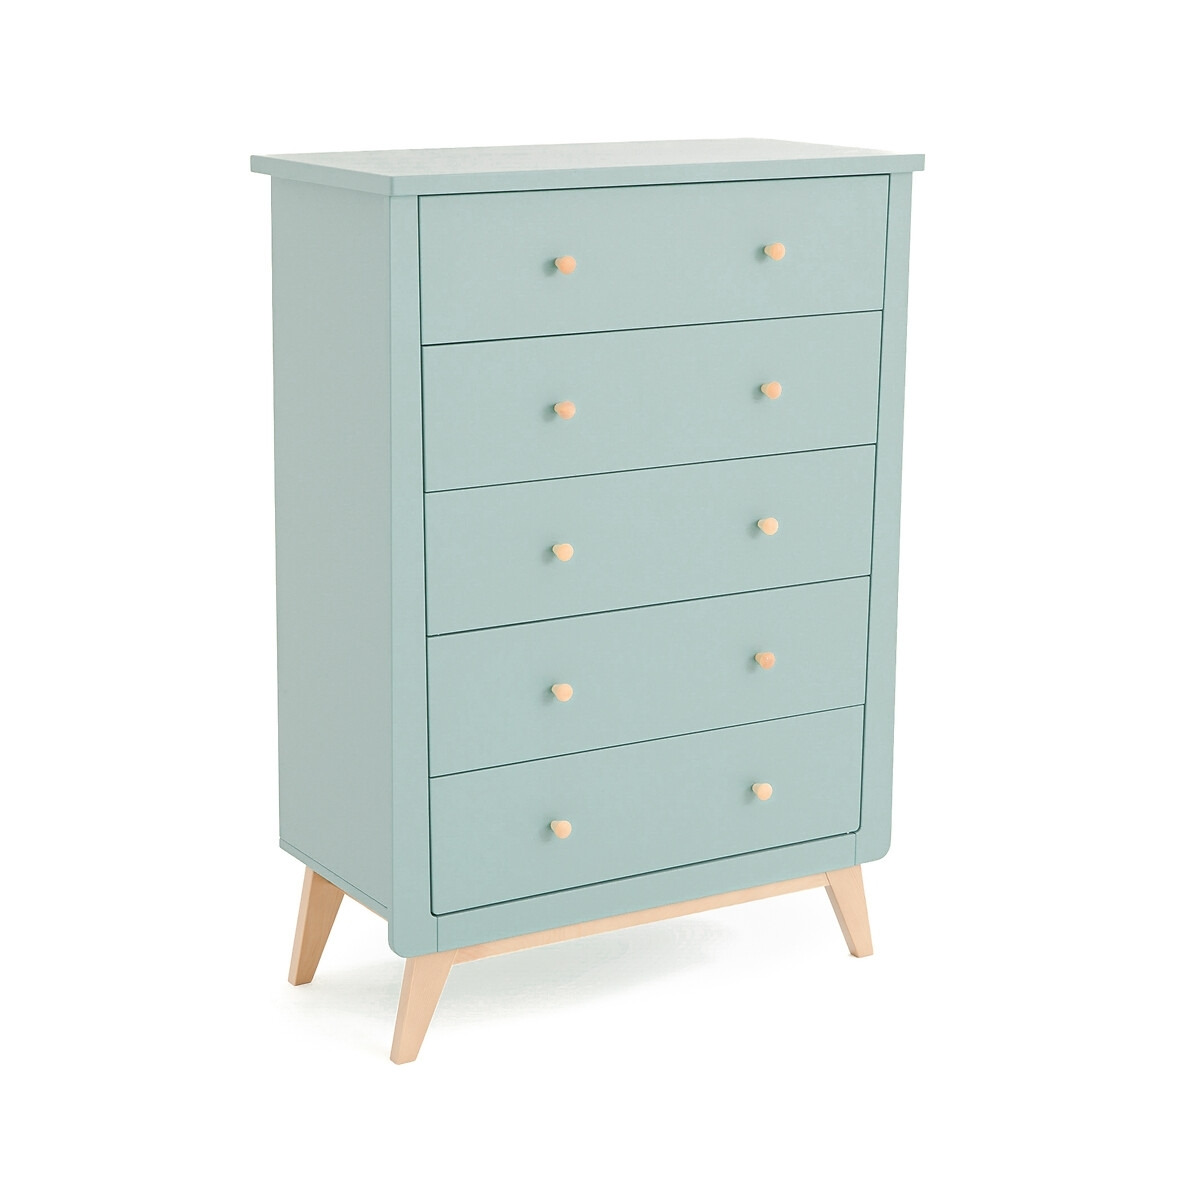 Willox Chest of 5 Drawers - image 1